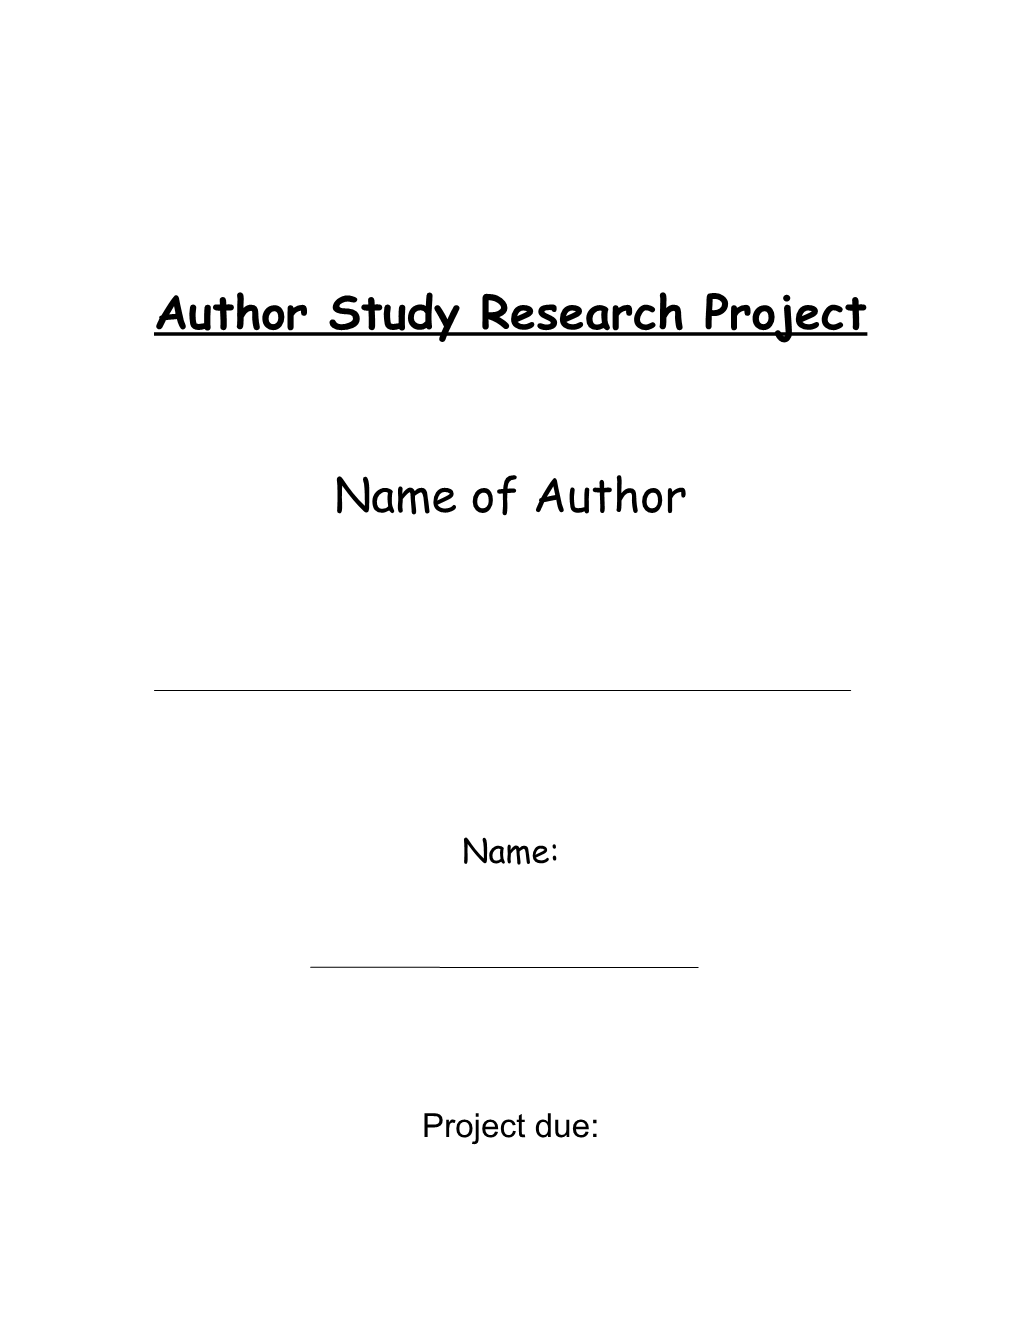 Author Study Research Project